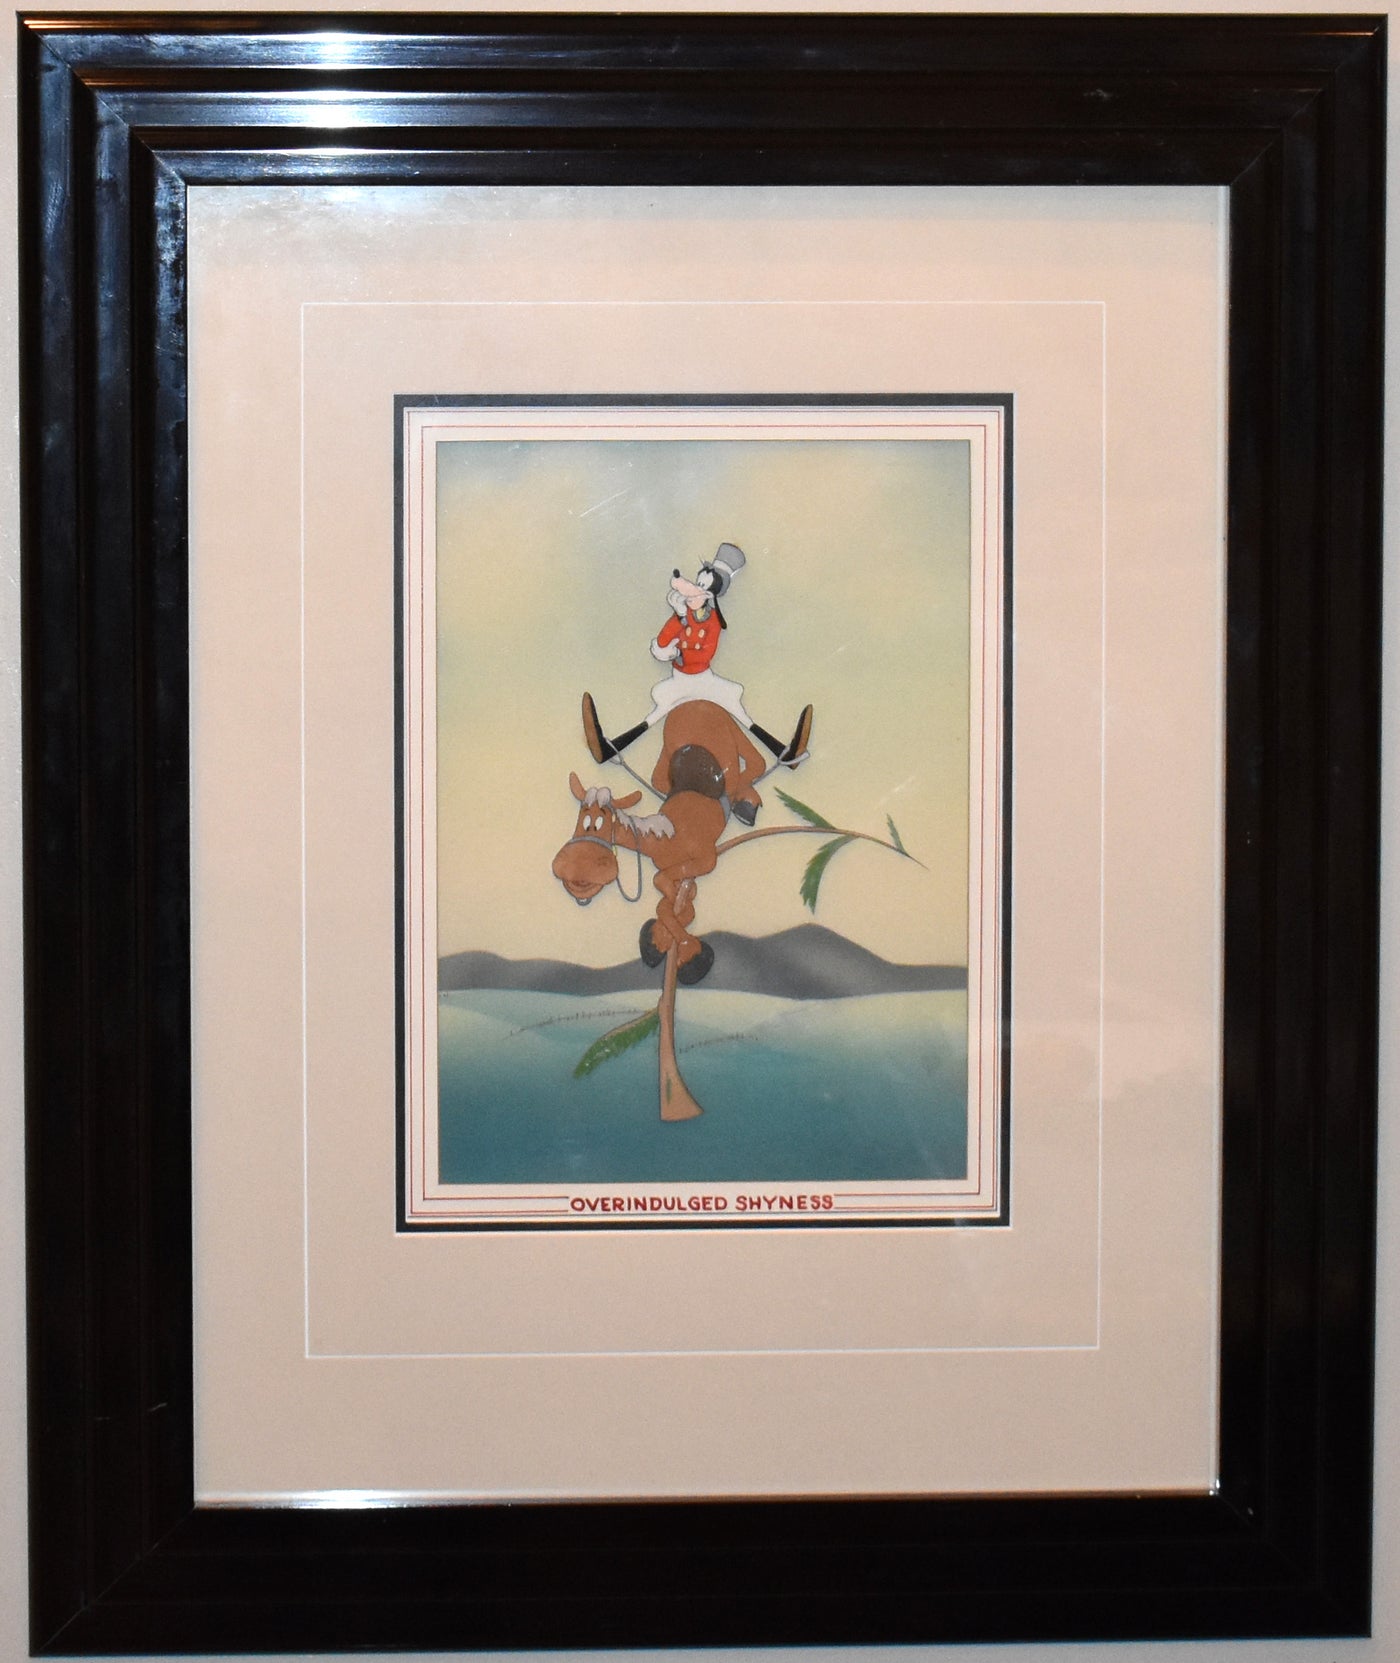 Original Walt Disney Production Cel Featuring Goofy from How to Ride a Horse (1941)